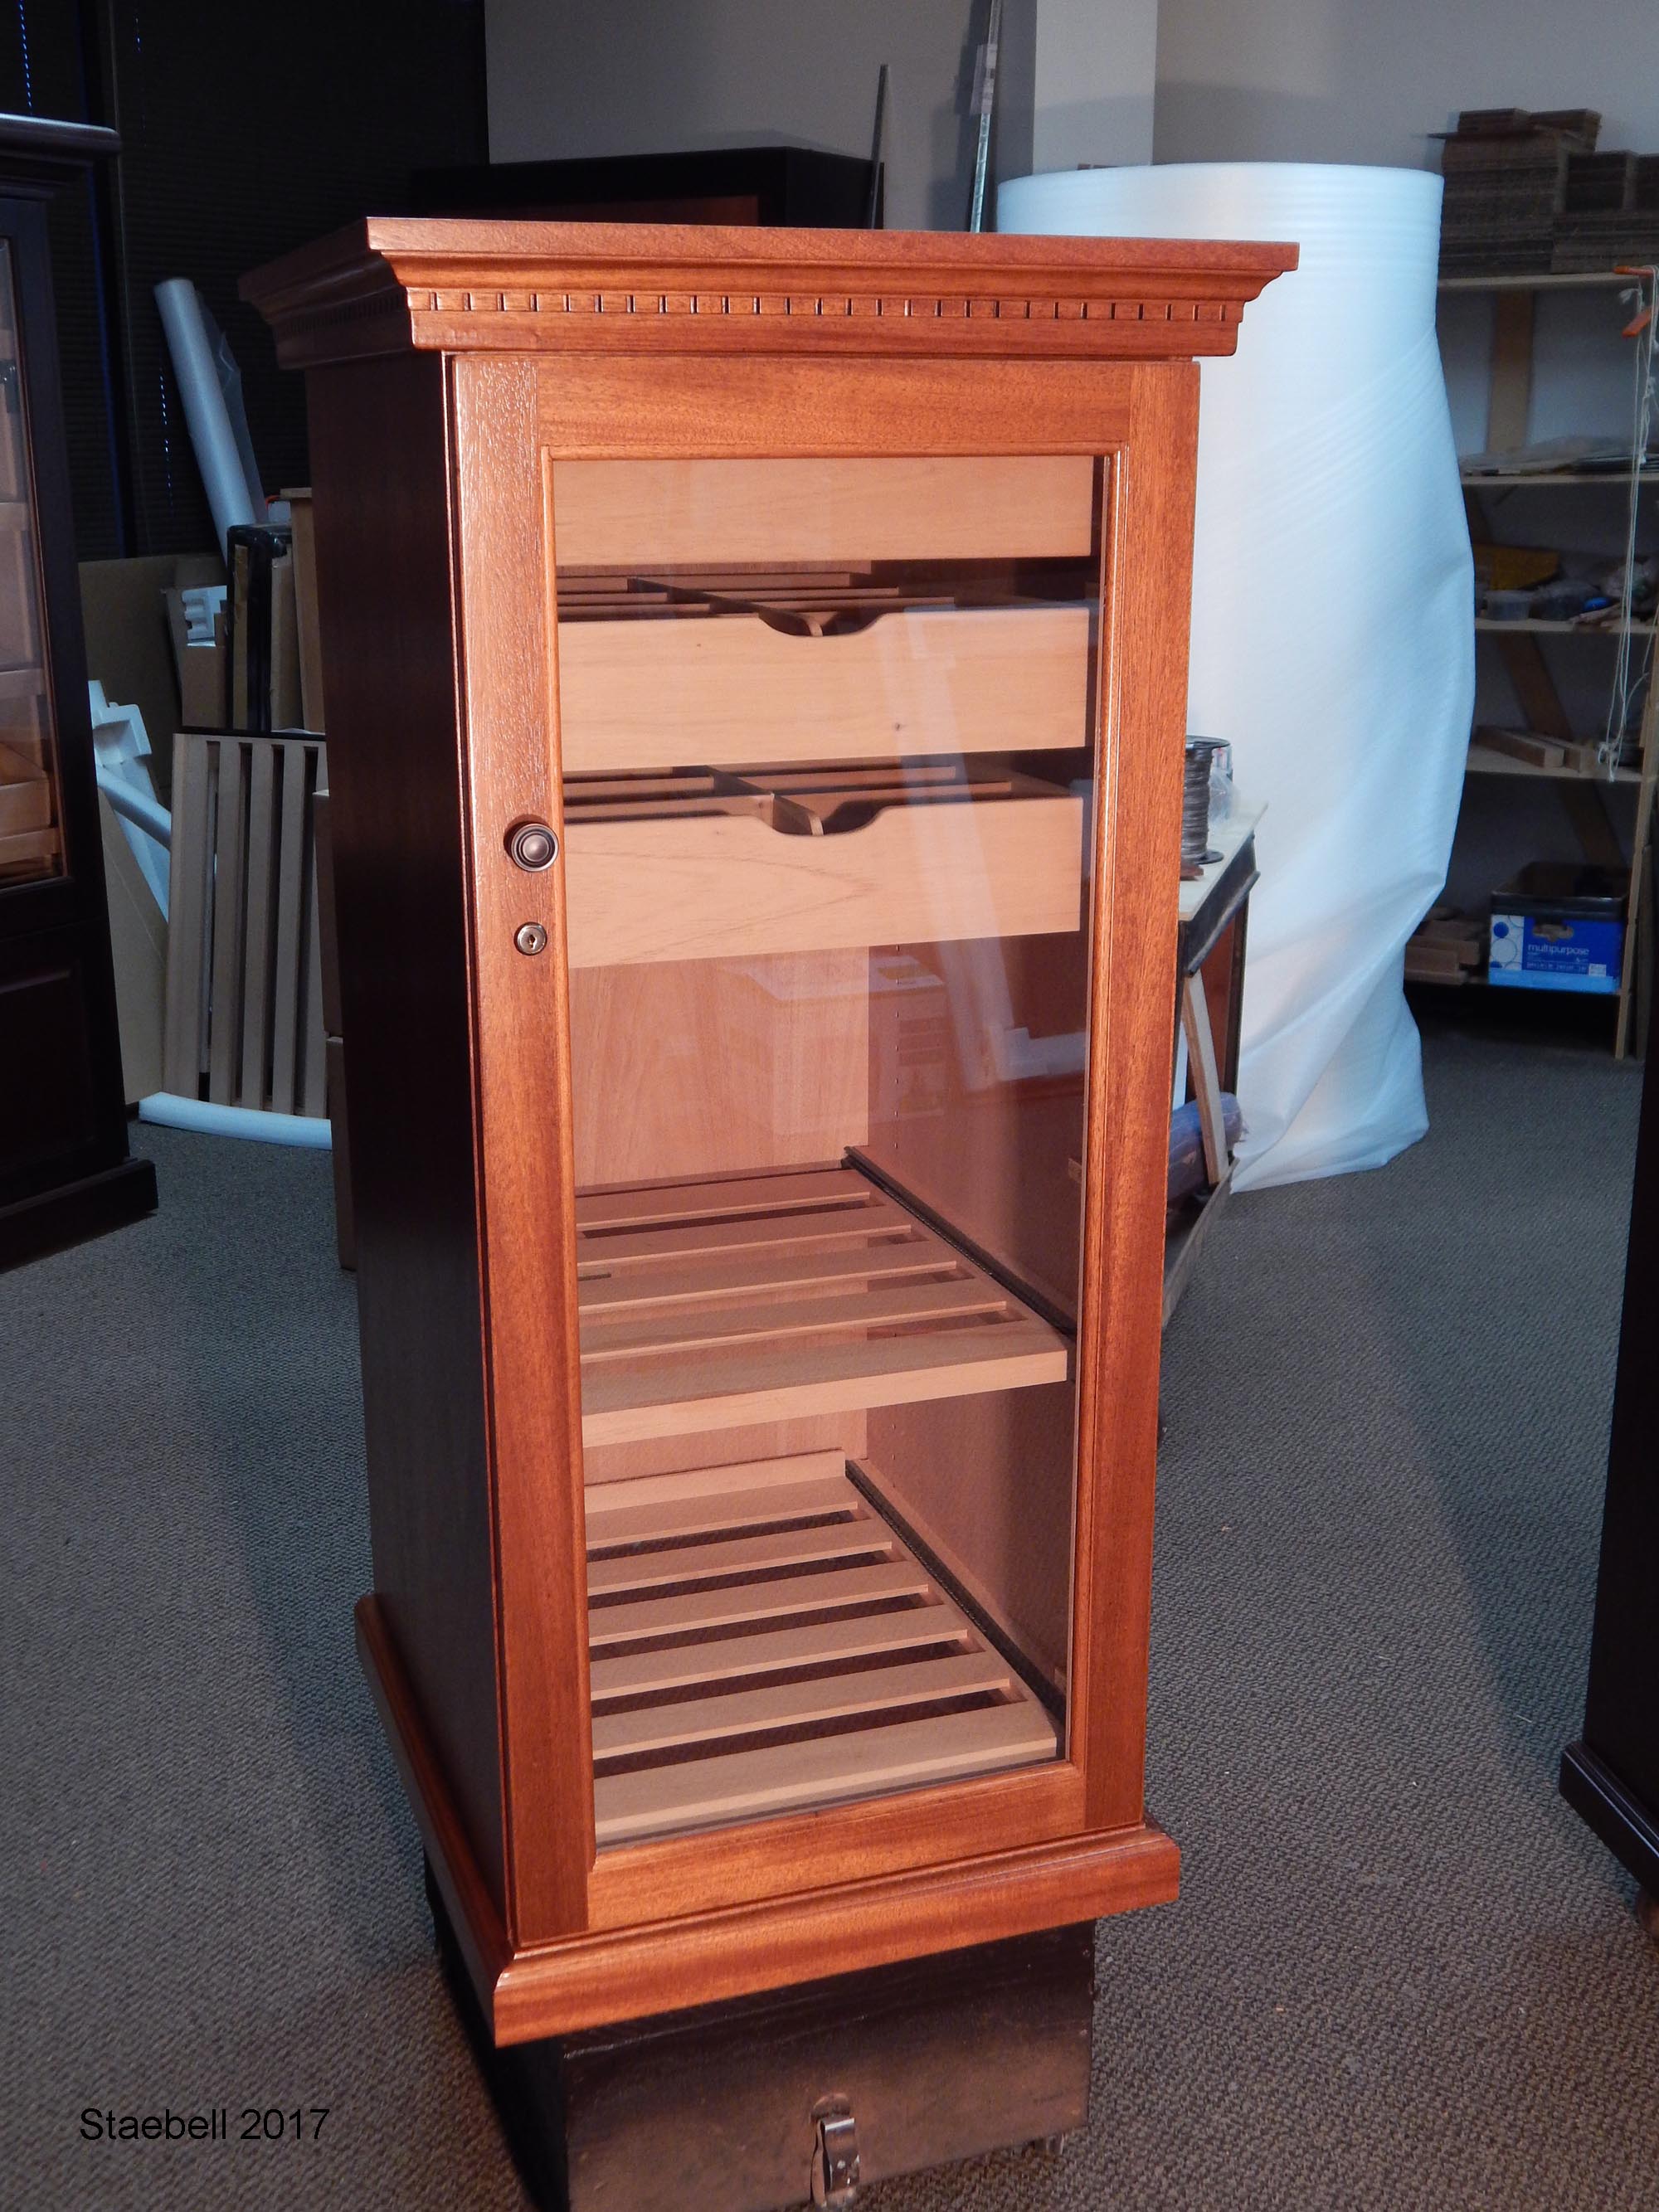 Aristocrat Humidor - Cigars Discussion Forum "the water hole" - Friends of el Habano Cuban Cigars Discussion Forum - FOH